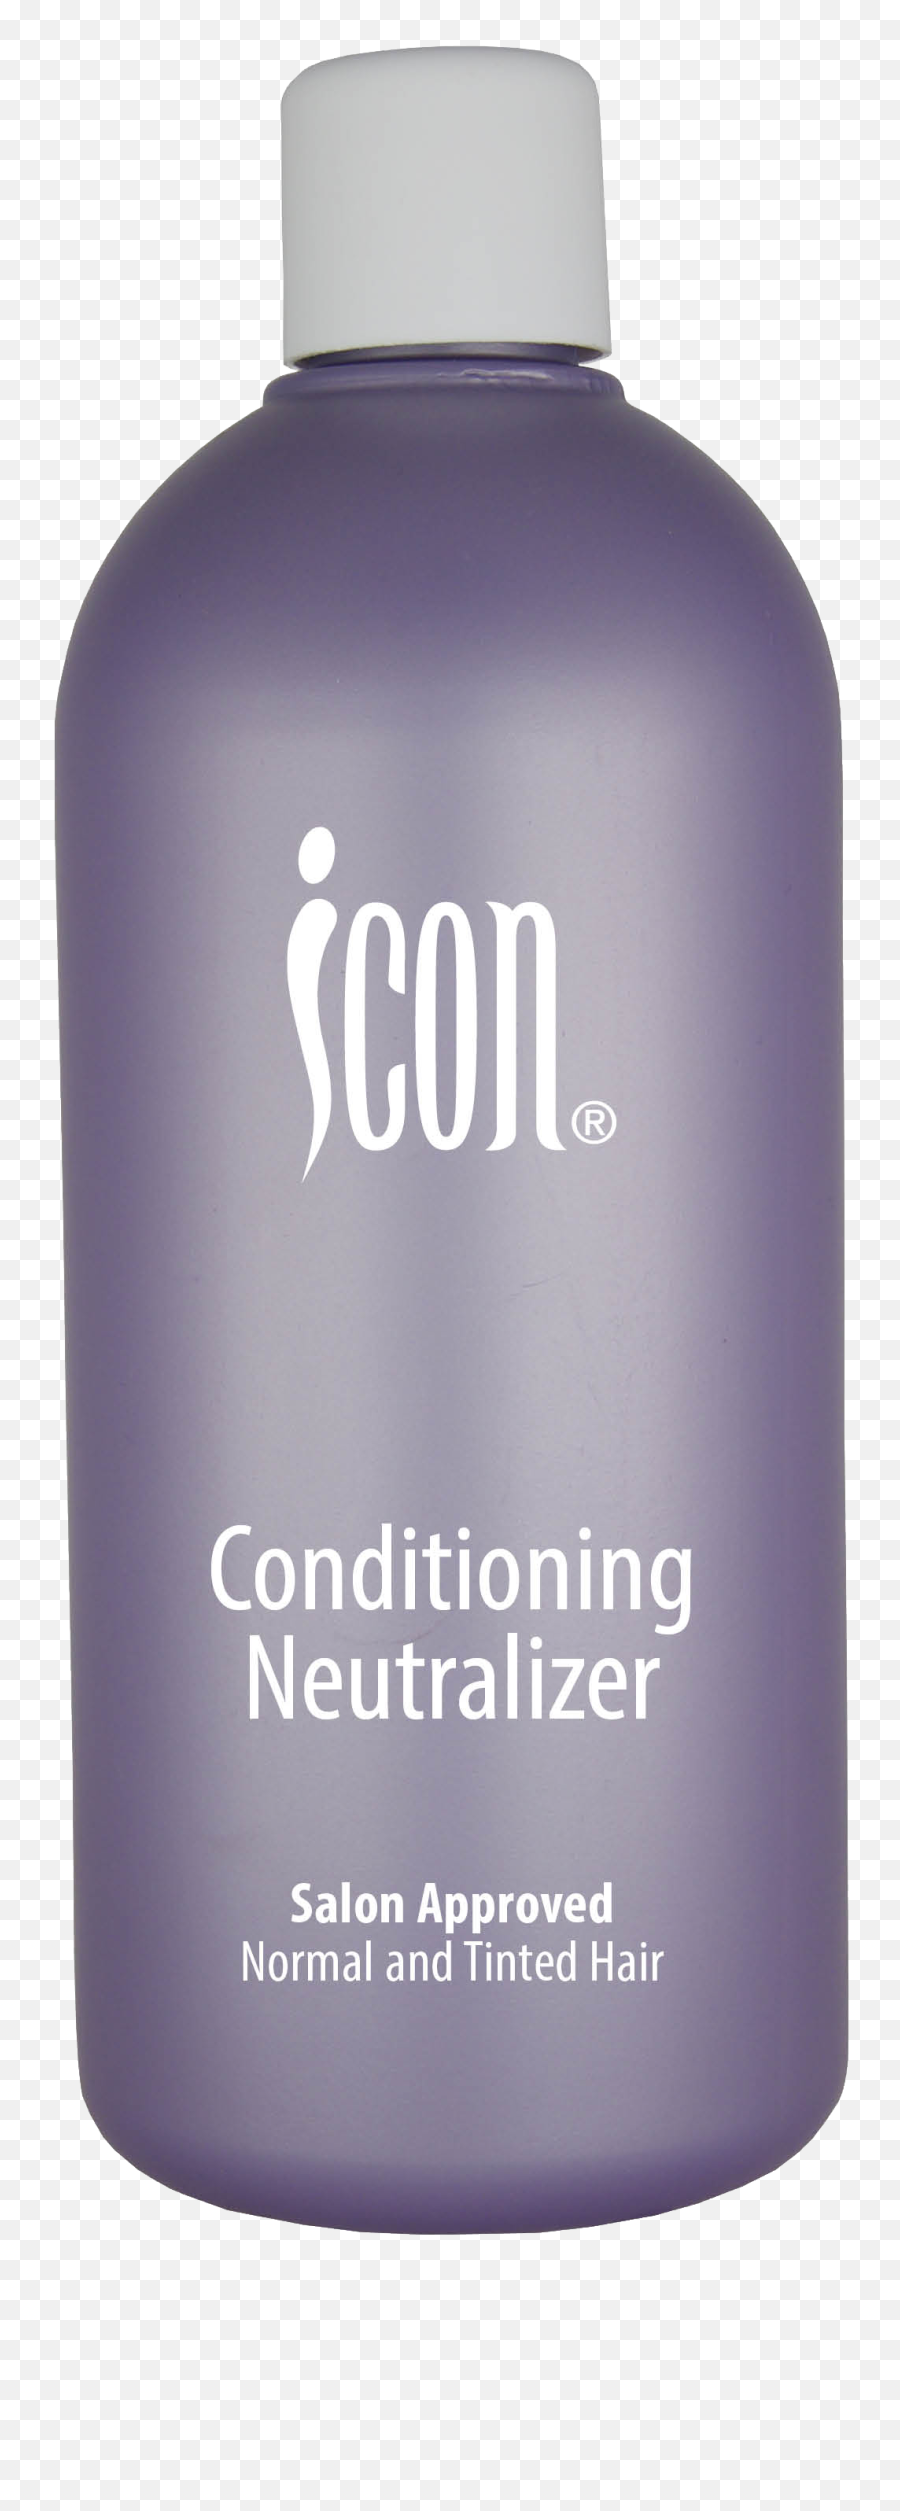 Conditioning Neutralizer 1licon Hair - Lotion Png,Envy Icon